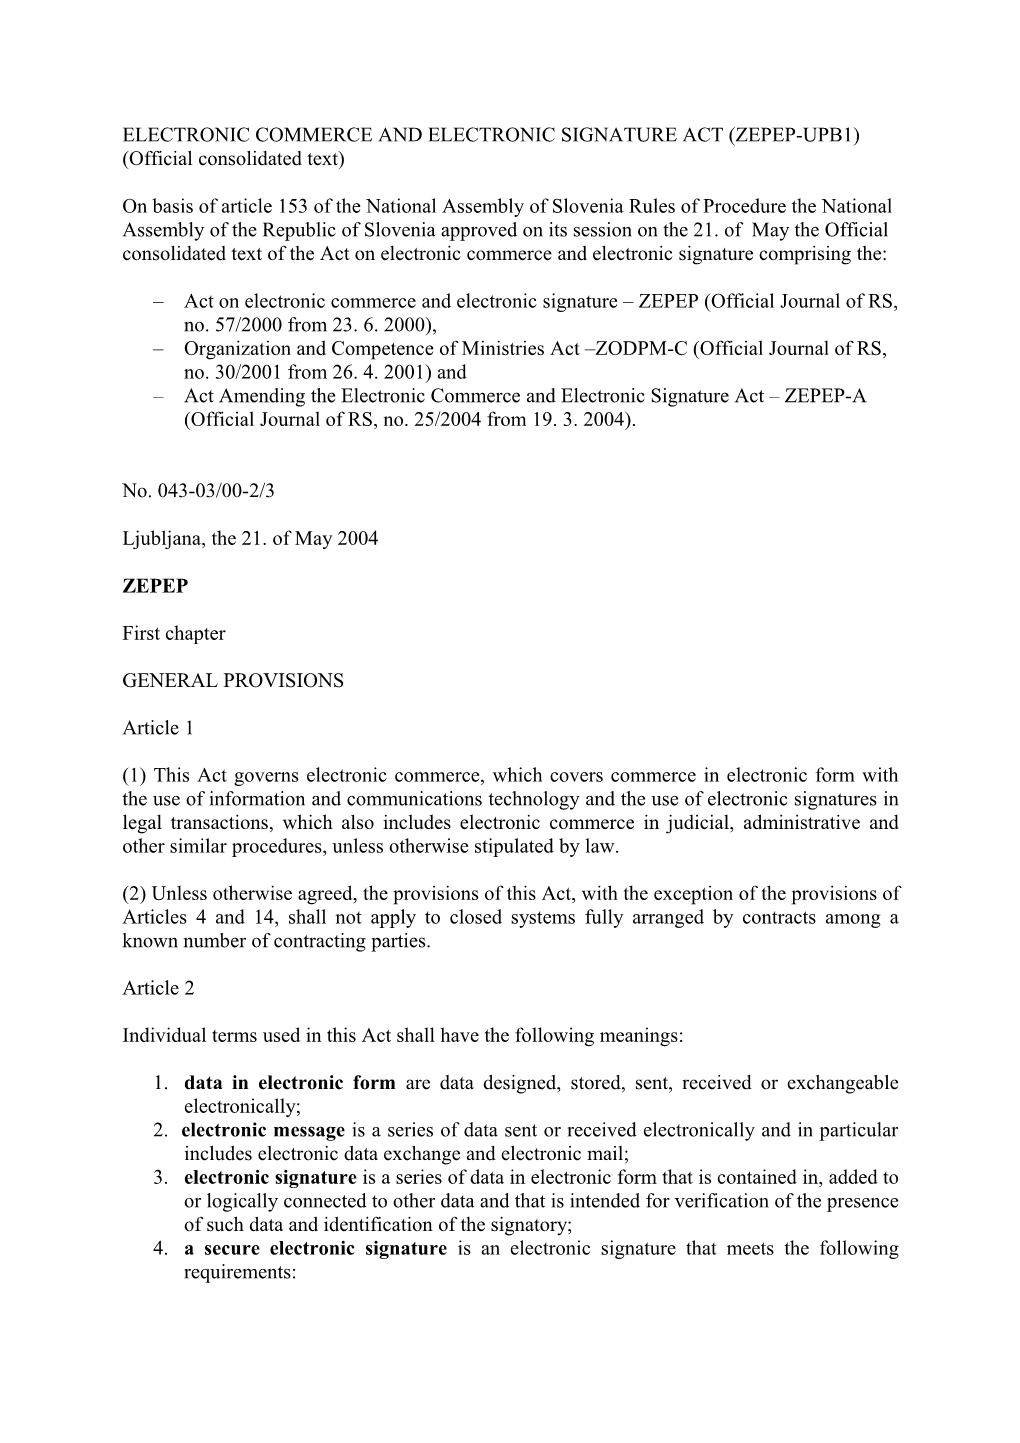 ELECTRONIC COMMERCE and ELECTRONIC SIGNATURE ACT(ZEPEP-UPB1) (Official Consolidated Text)